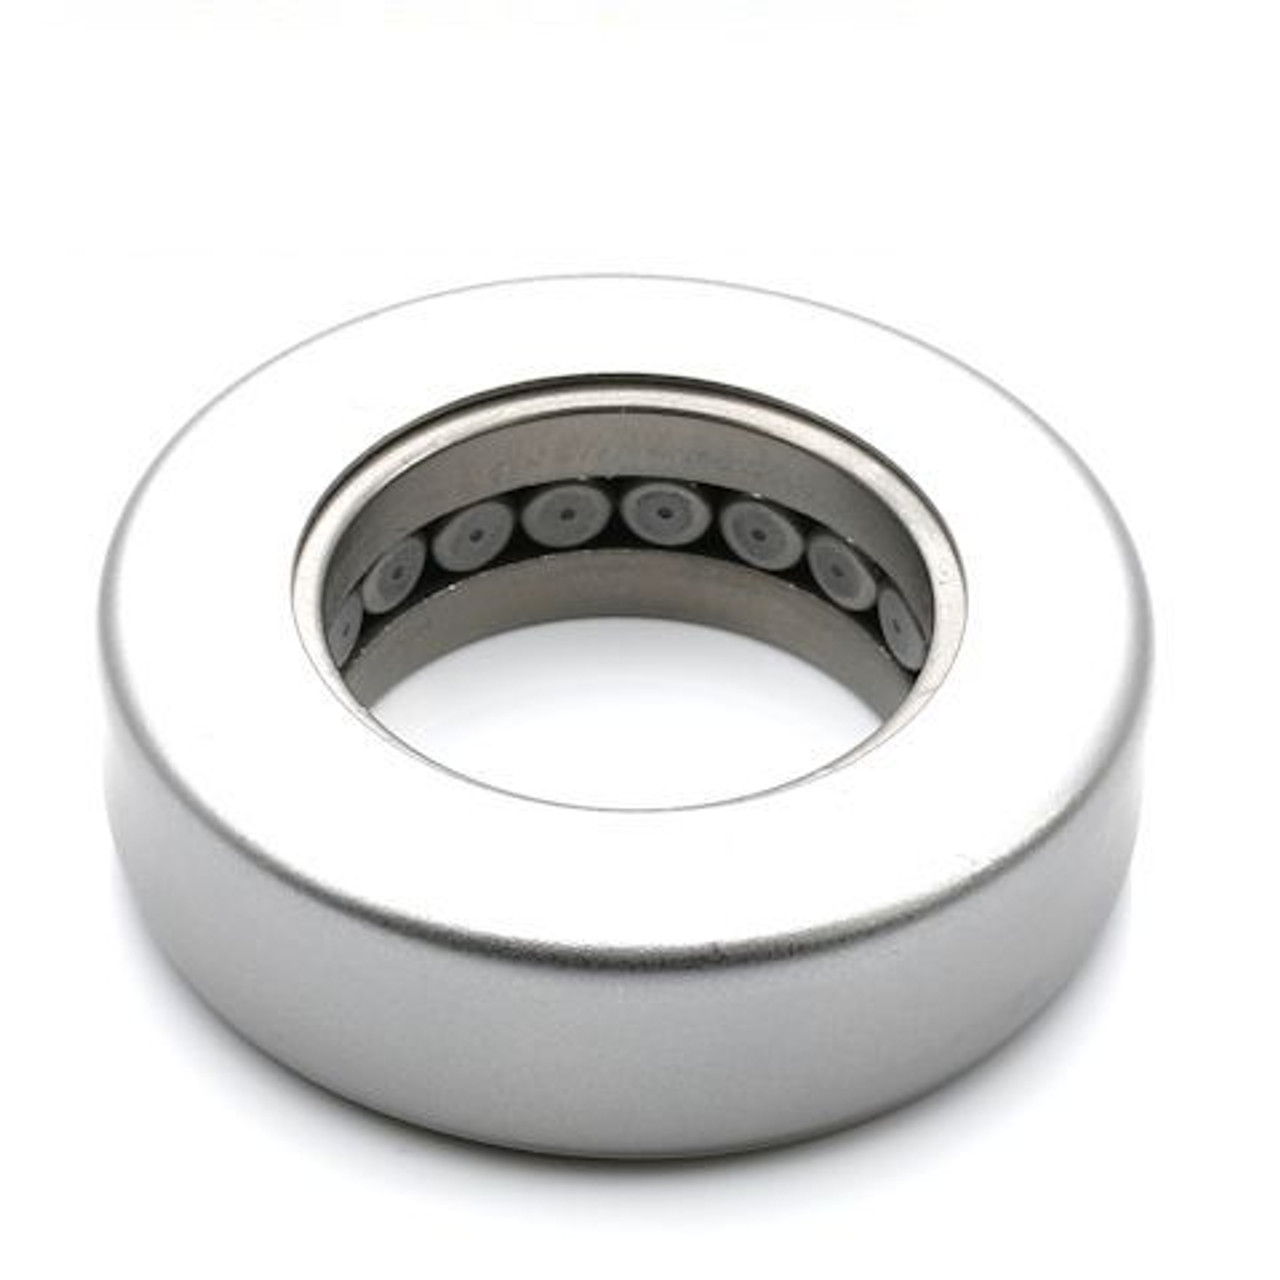 Timken® Stamped Race Thrust Bearing  T301-904A2